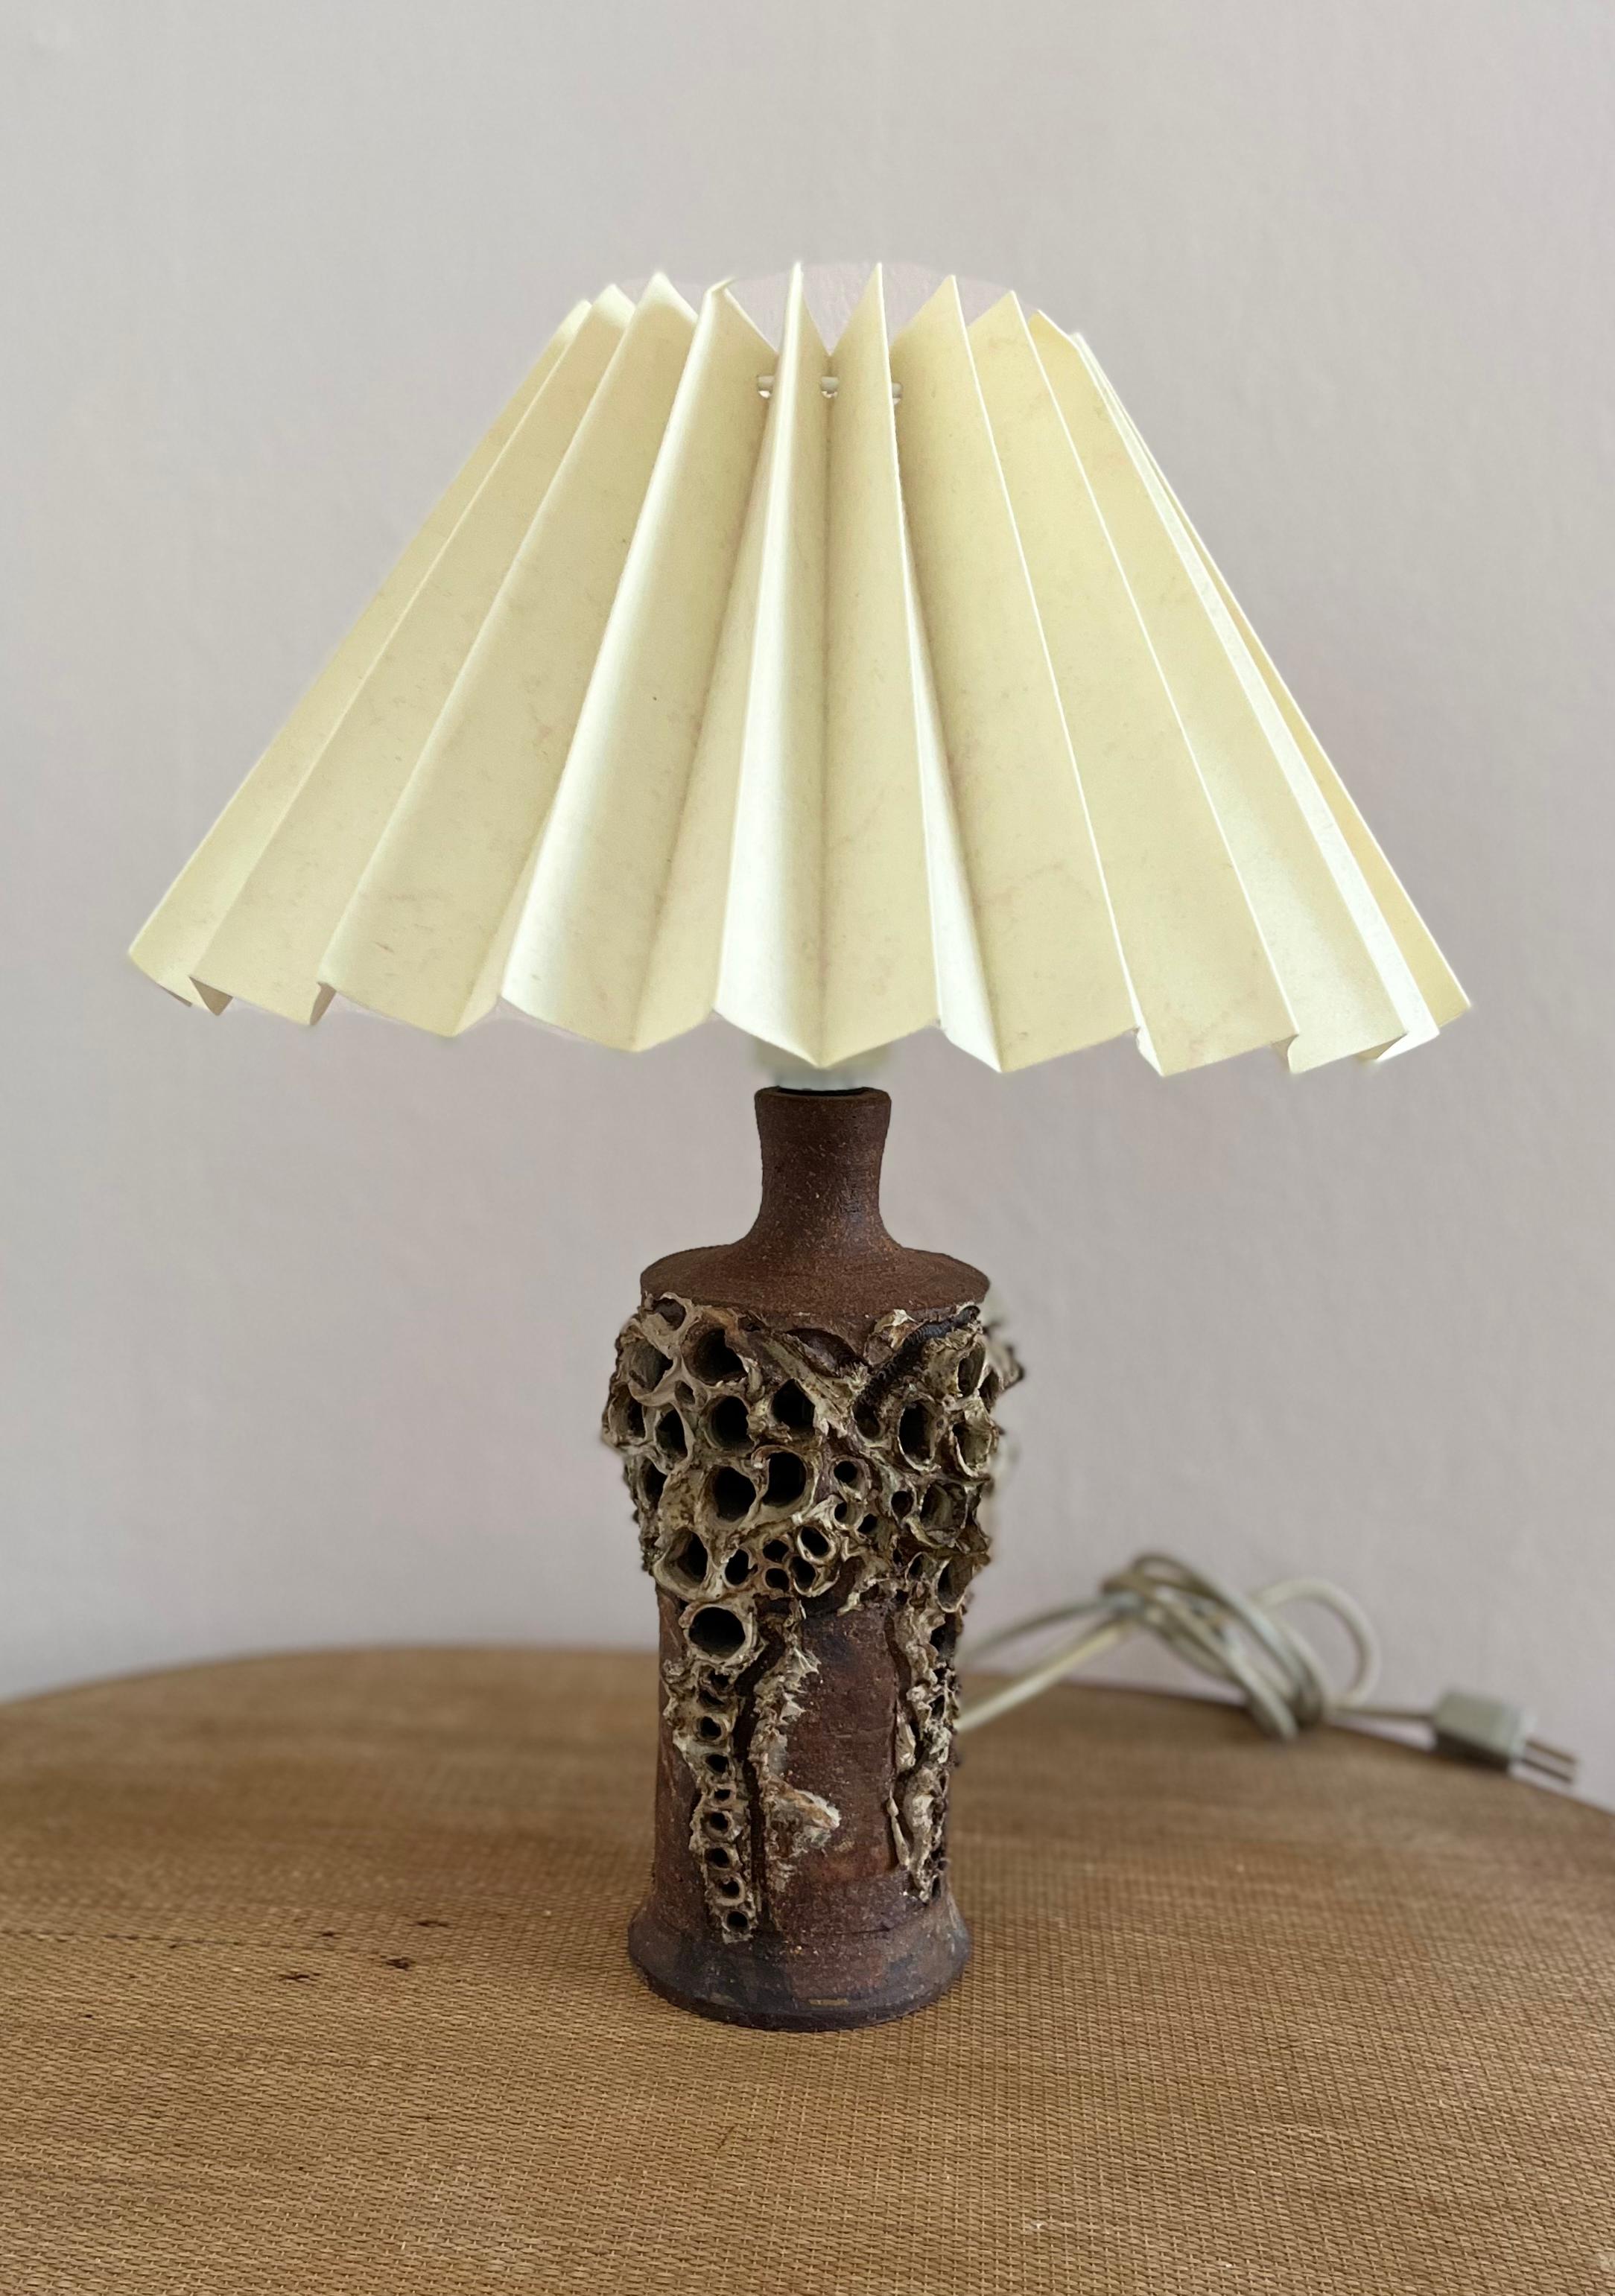 1960s brutalist Danish ceramic table lamp by Bodil Marie Nielsen

If you're in the know, you'll instantly recognize this 1960s brutalist ceramic table as the work of Danish Bodil Marie Nielsen. Beautiful, brutal and eyecathingly cool. European wired